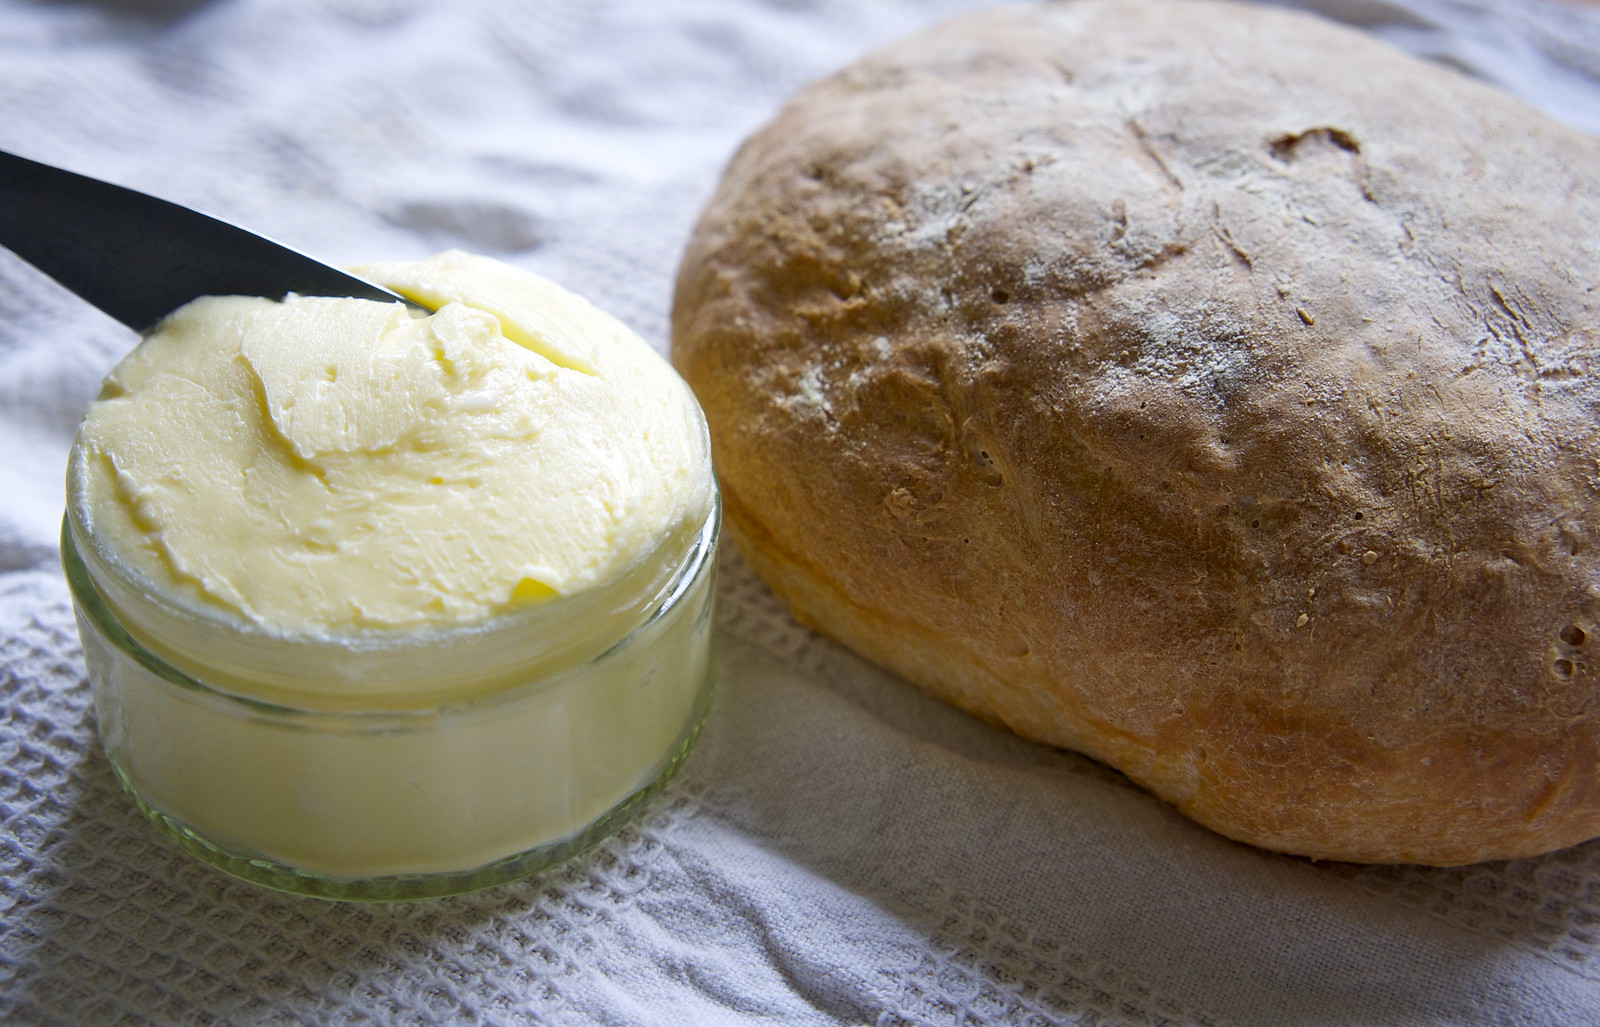 Homemade bread and butter